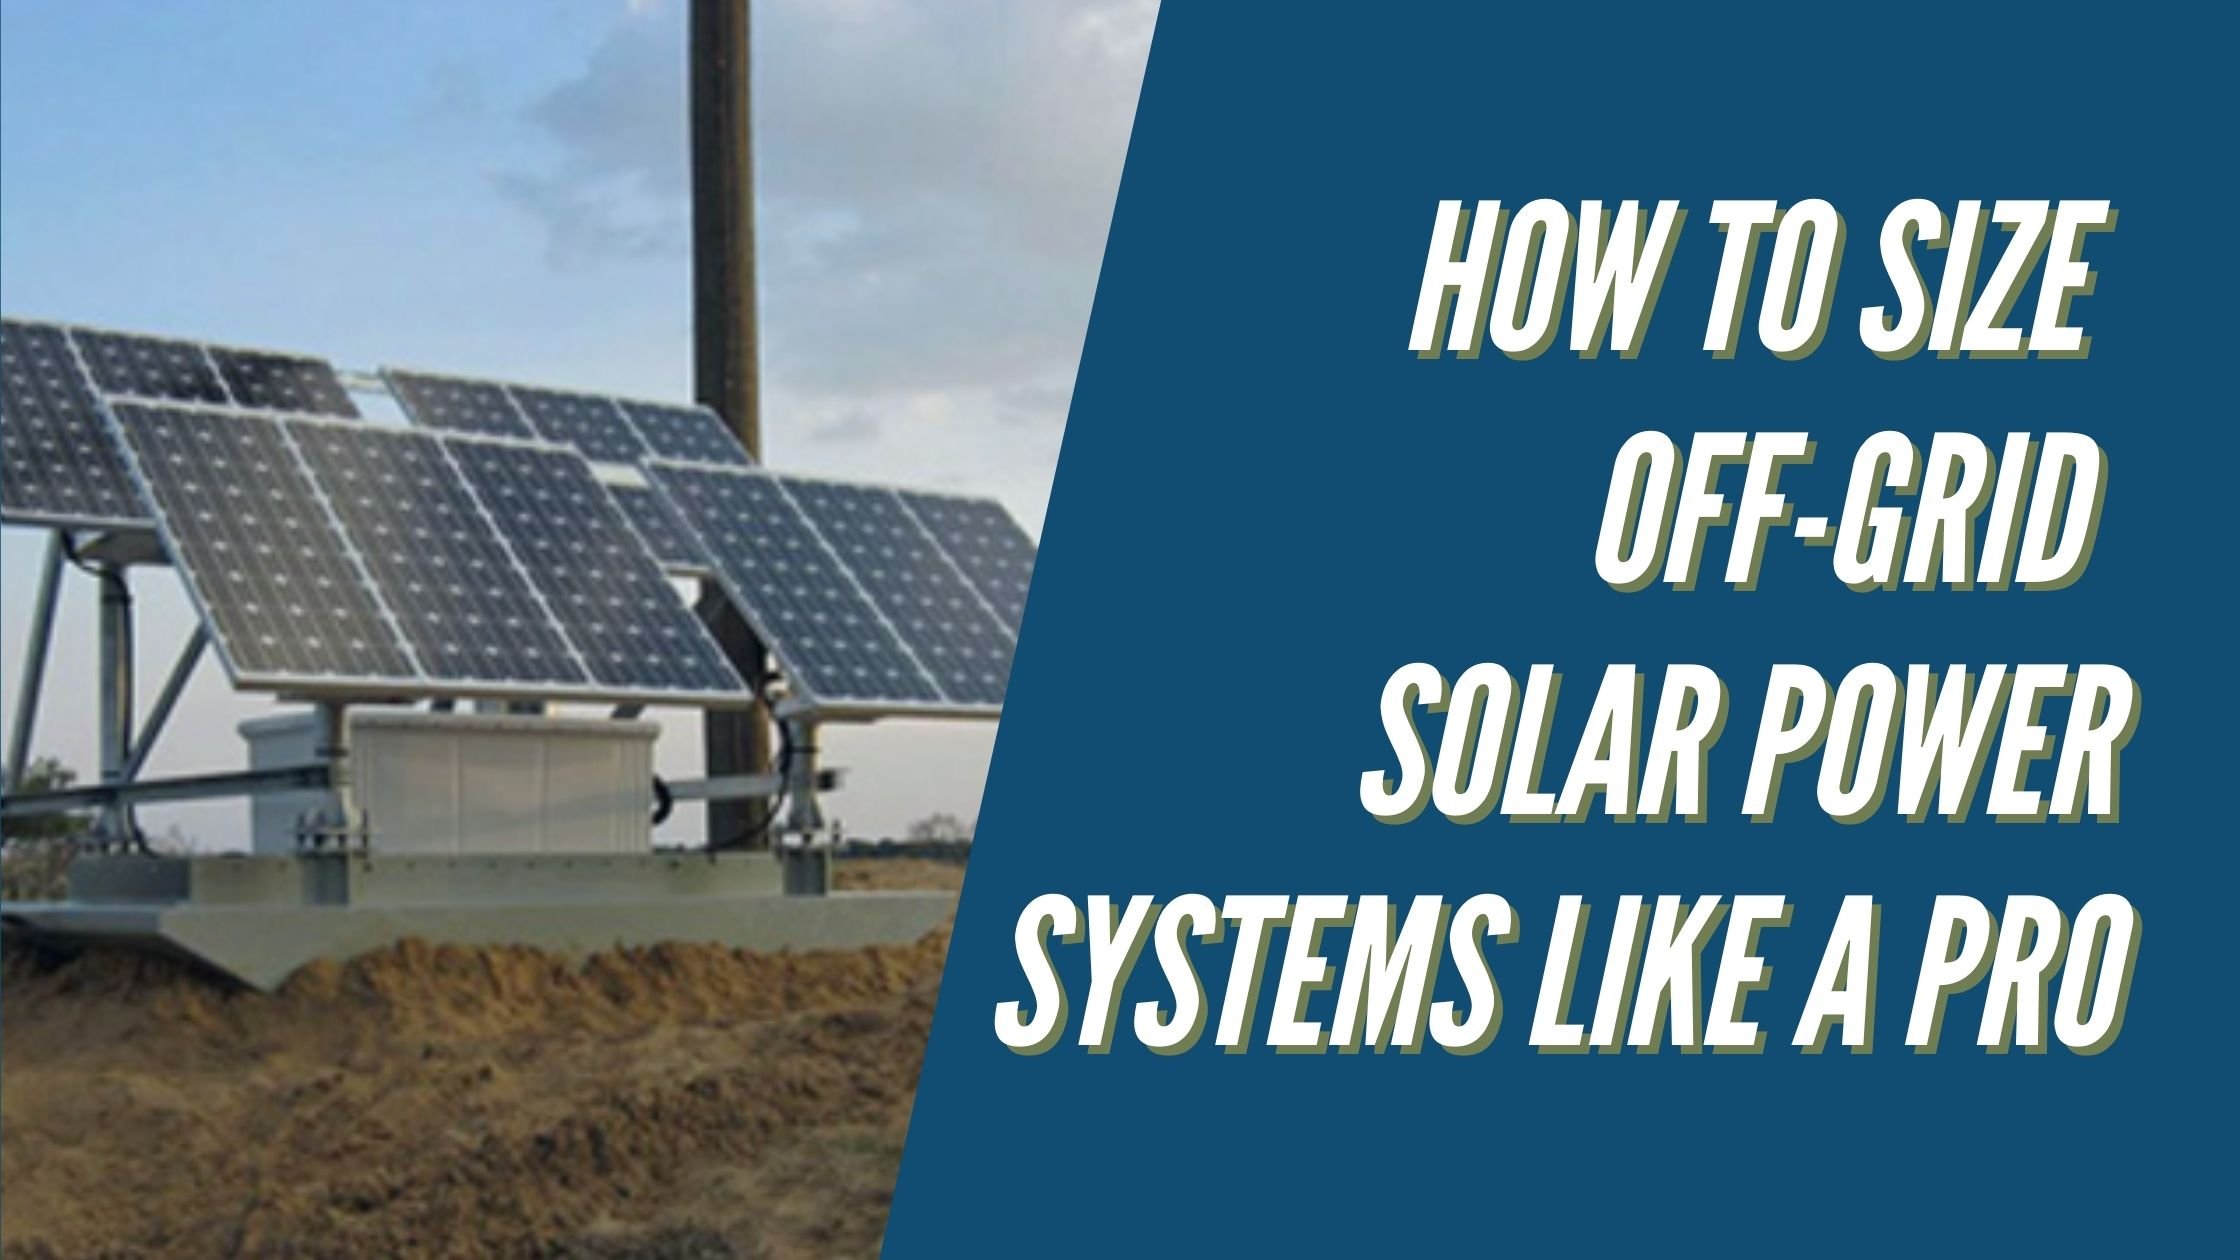 How to Size Off Grid Solar Power Systems Like a Pro